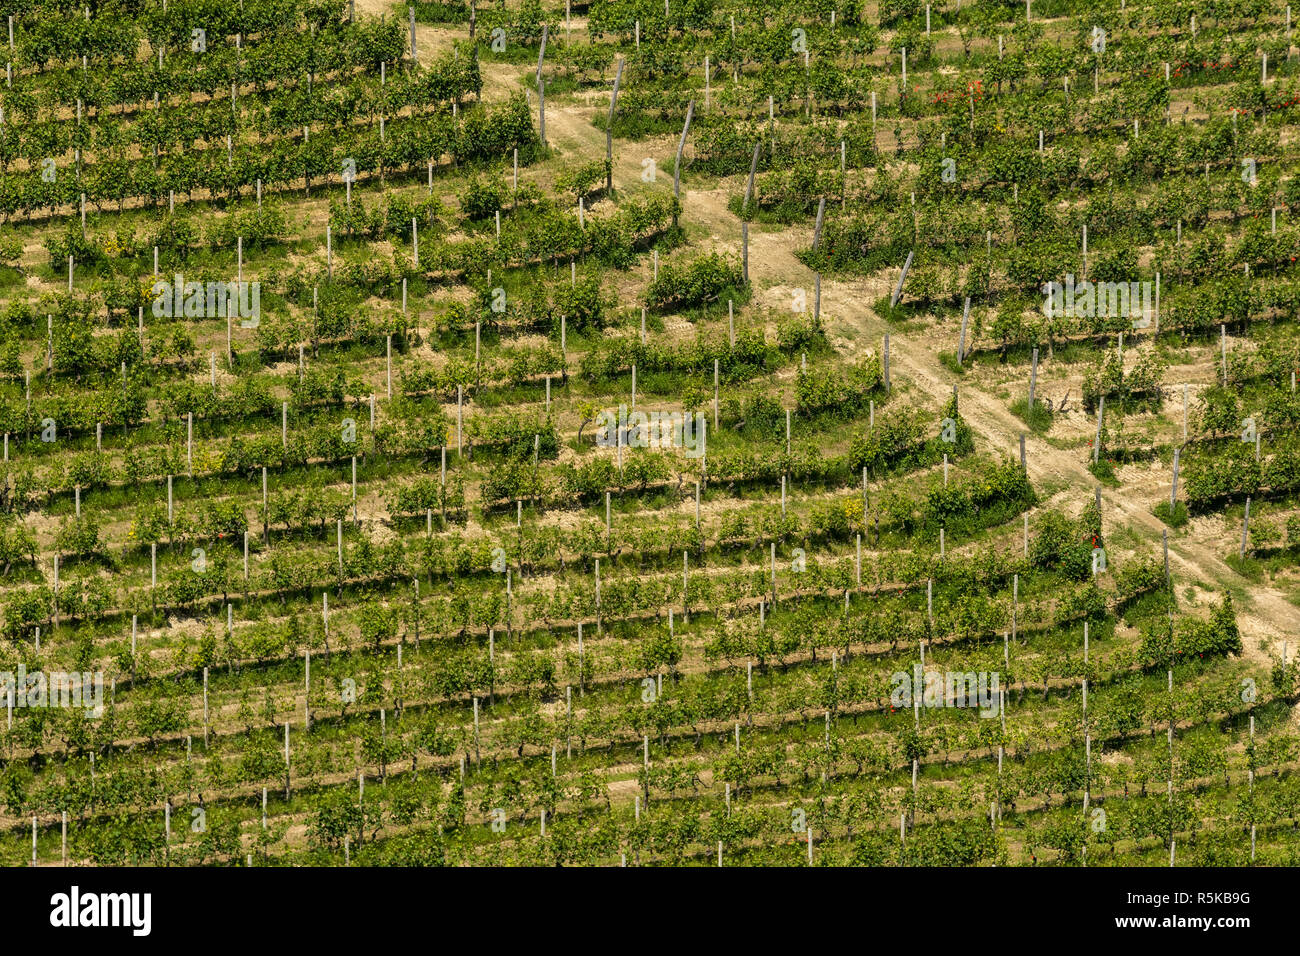 Rows of green grapevines growing along a hillside slope in Italy Stock Photo